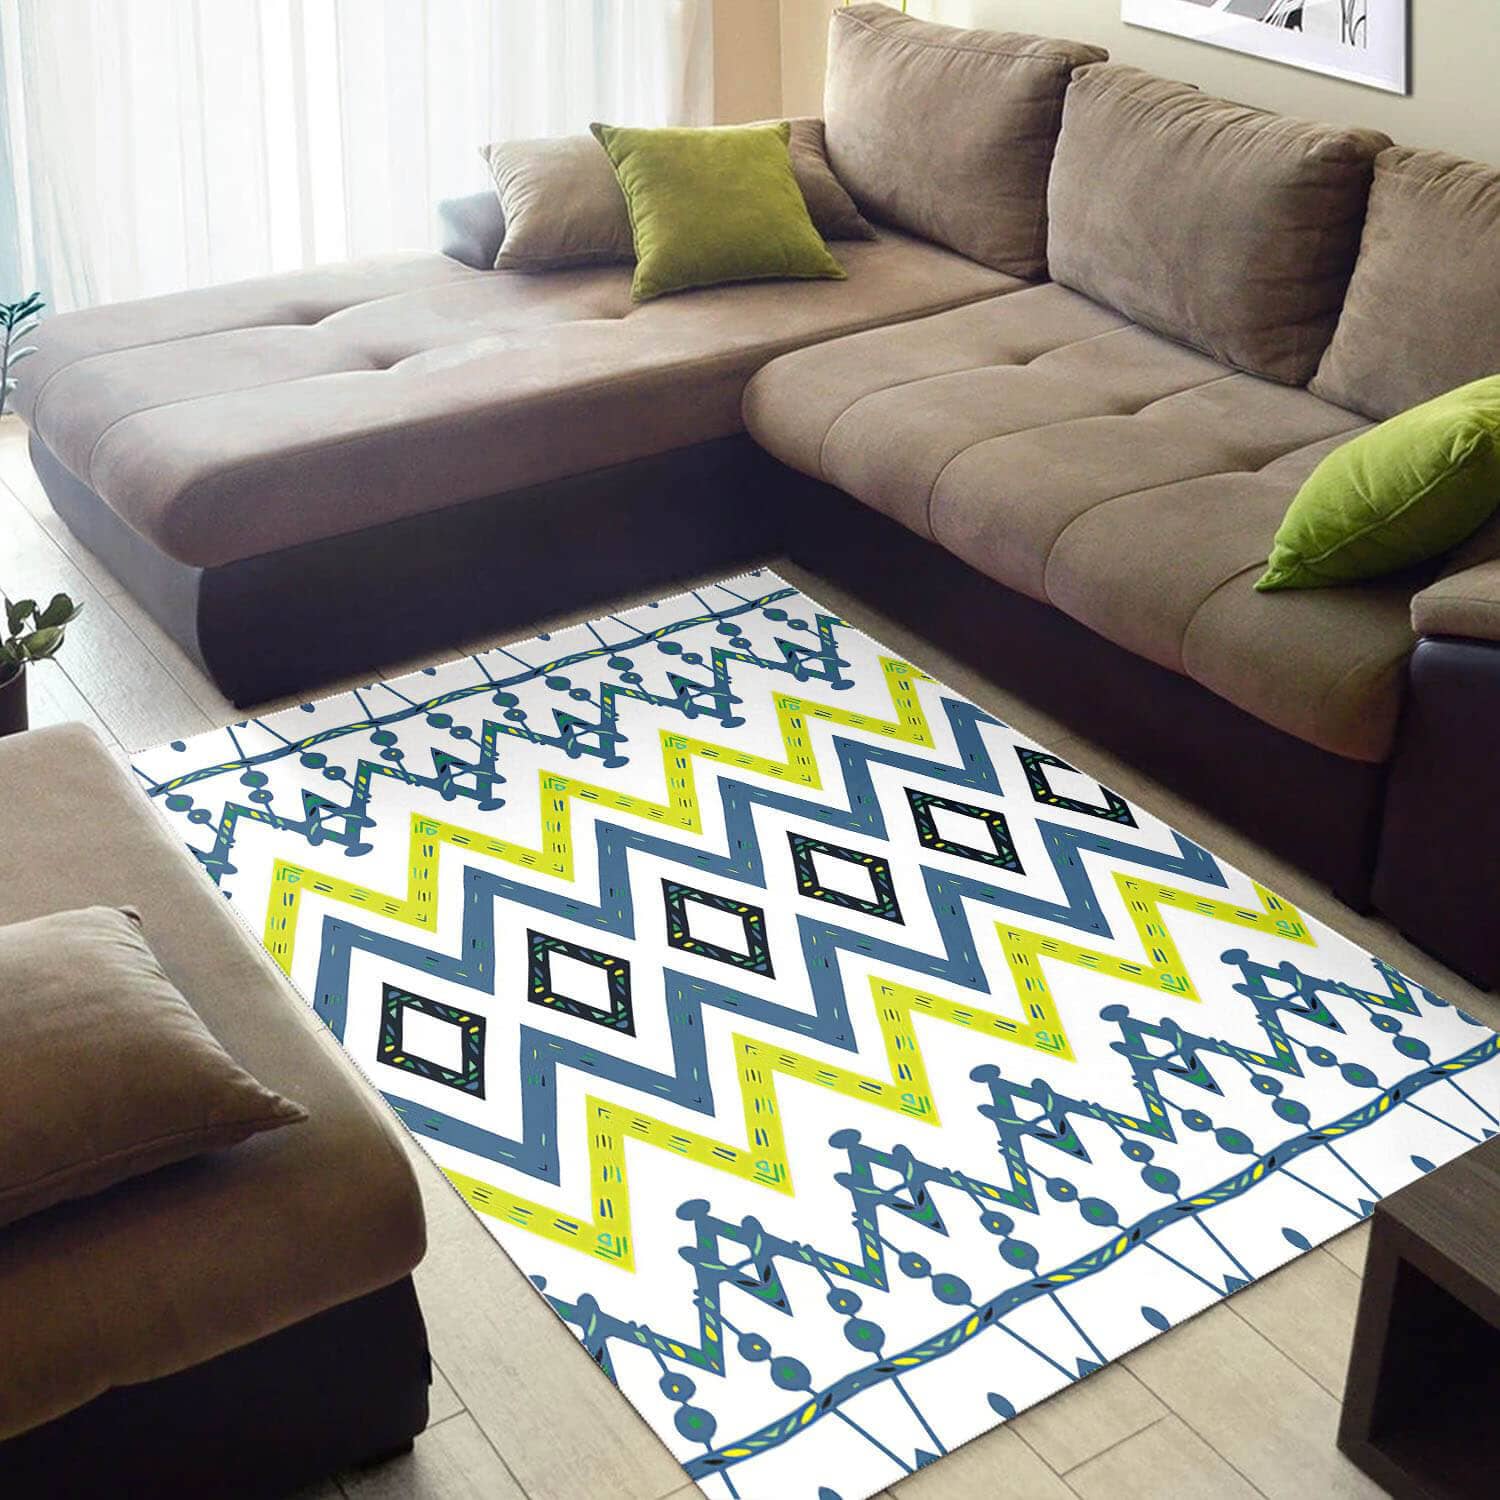 Nice African Retro Seamless Pattern Style Living Room Rug